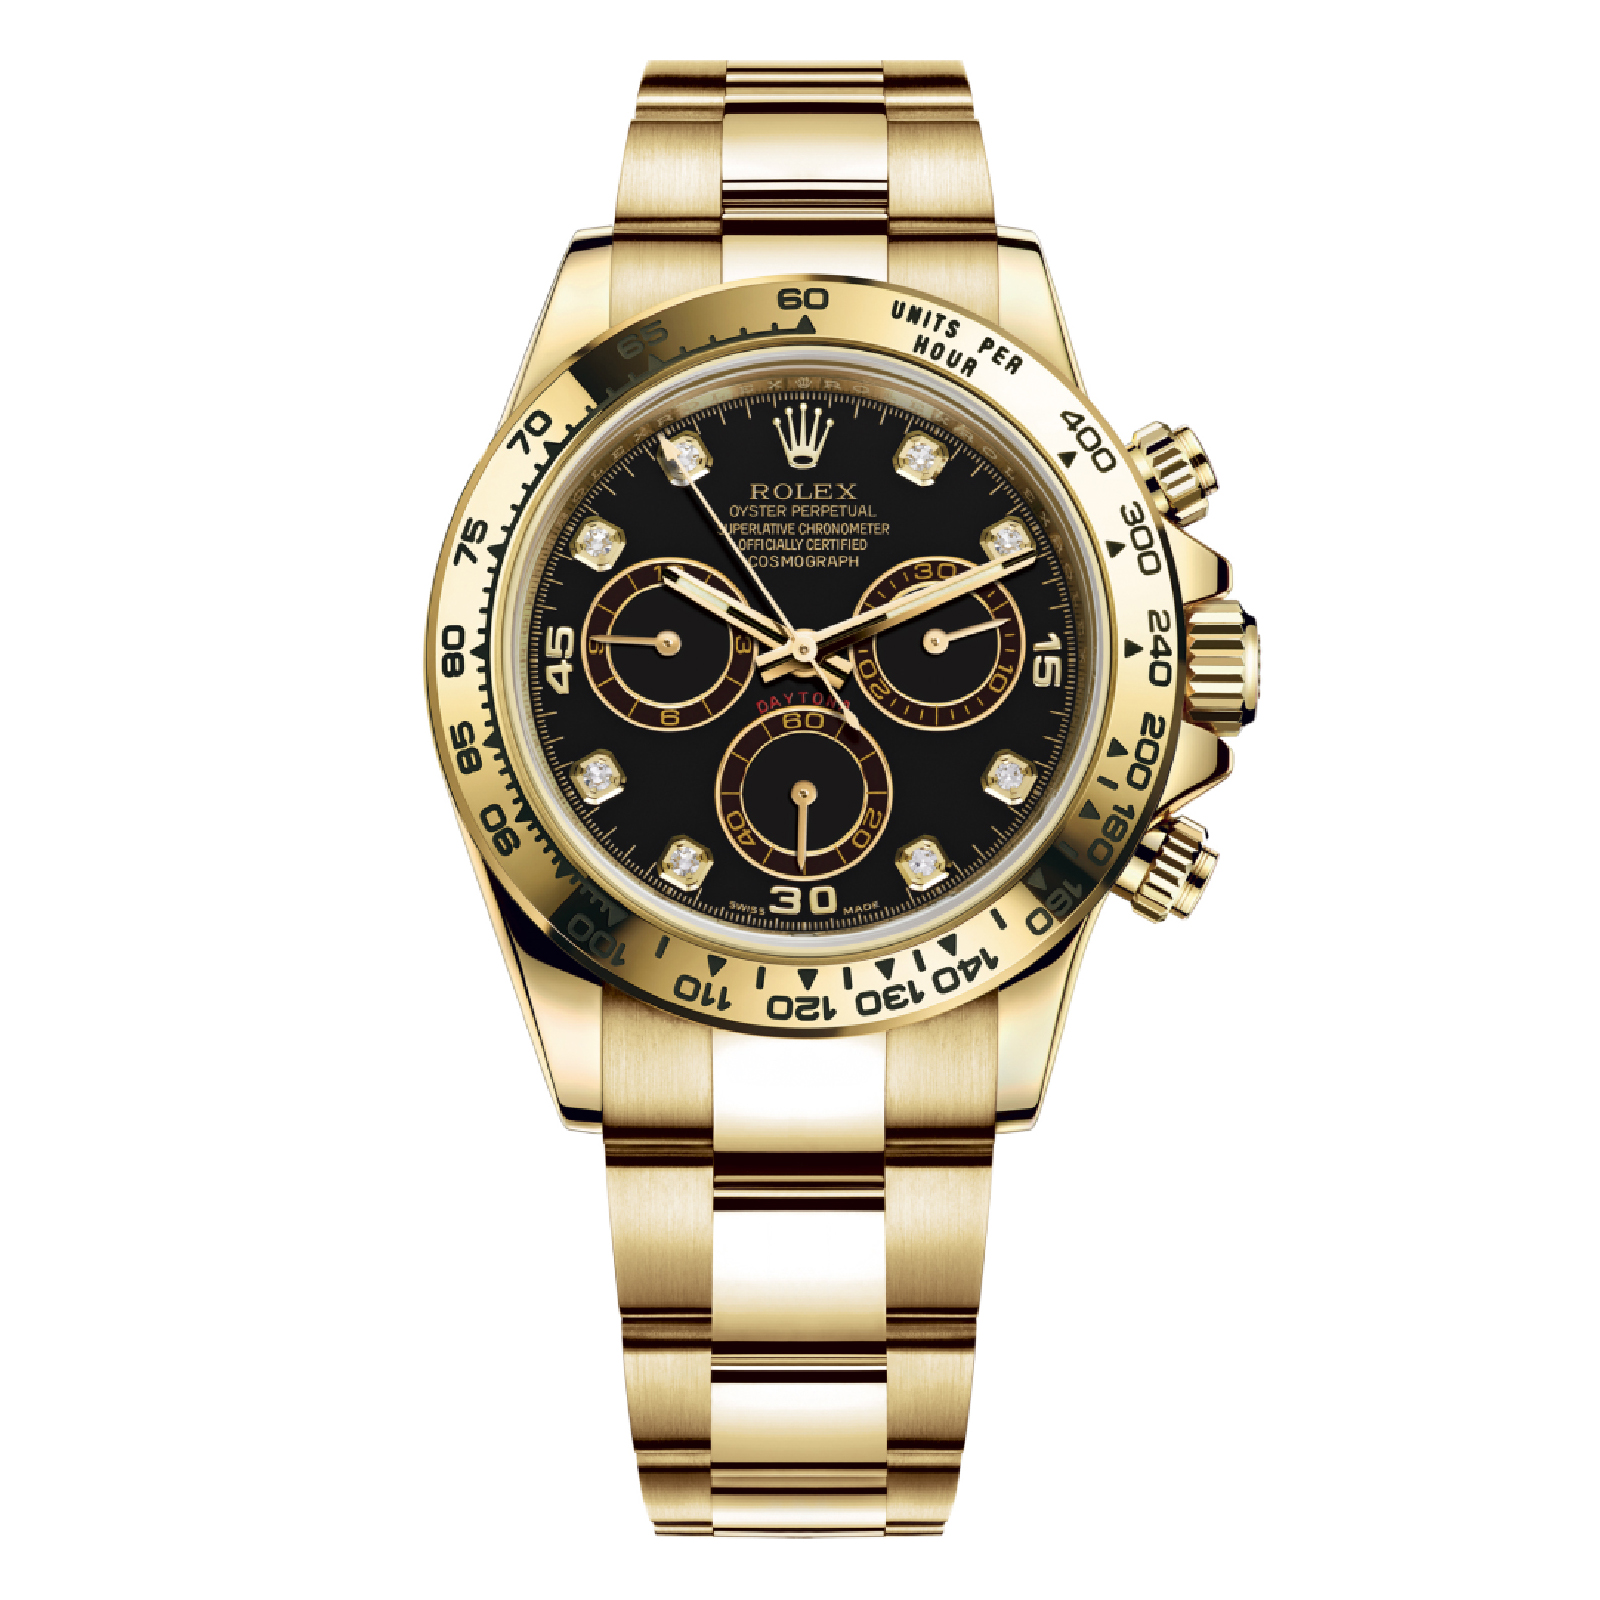 Rolex Daytona Cosmograph Yellow Gold, Black Dial | The Watch Meister